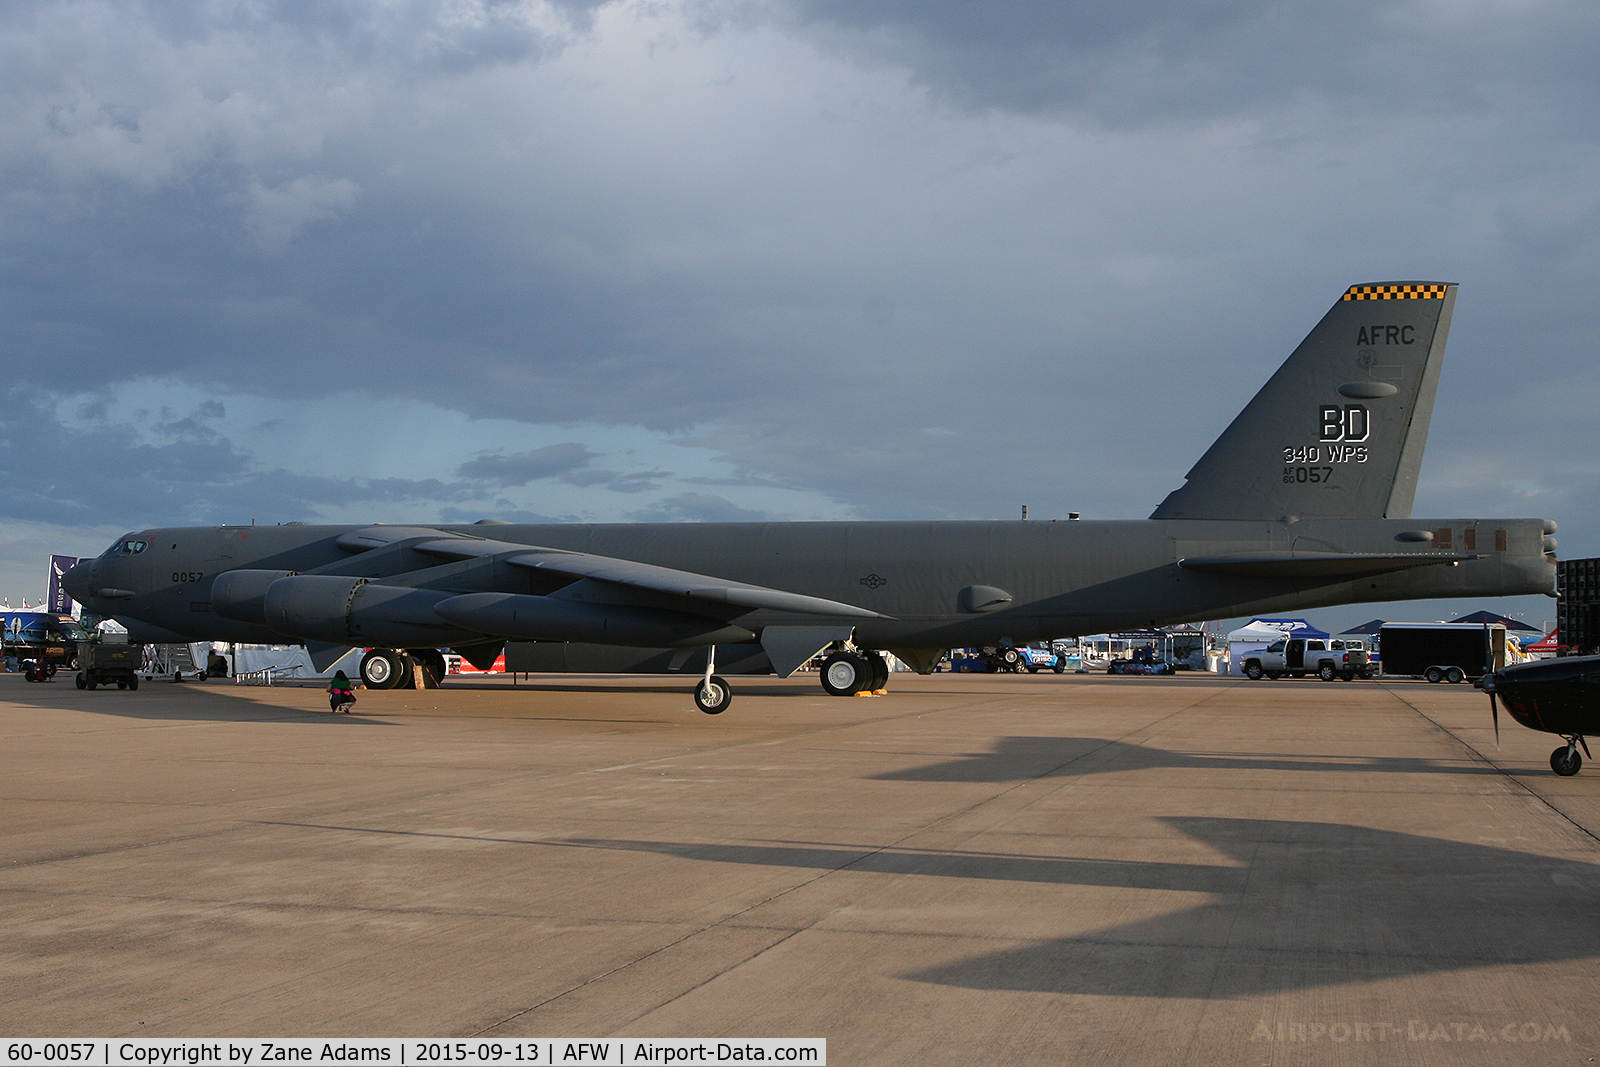 60-0057, 1960 Boeing B-52H Stratofortress C/N 464422, At the 2015 Alliance Airshow - Fort Worth, TX